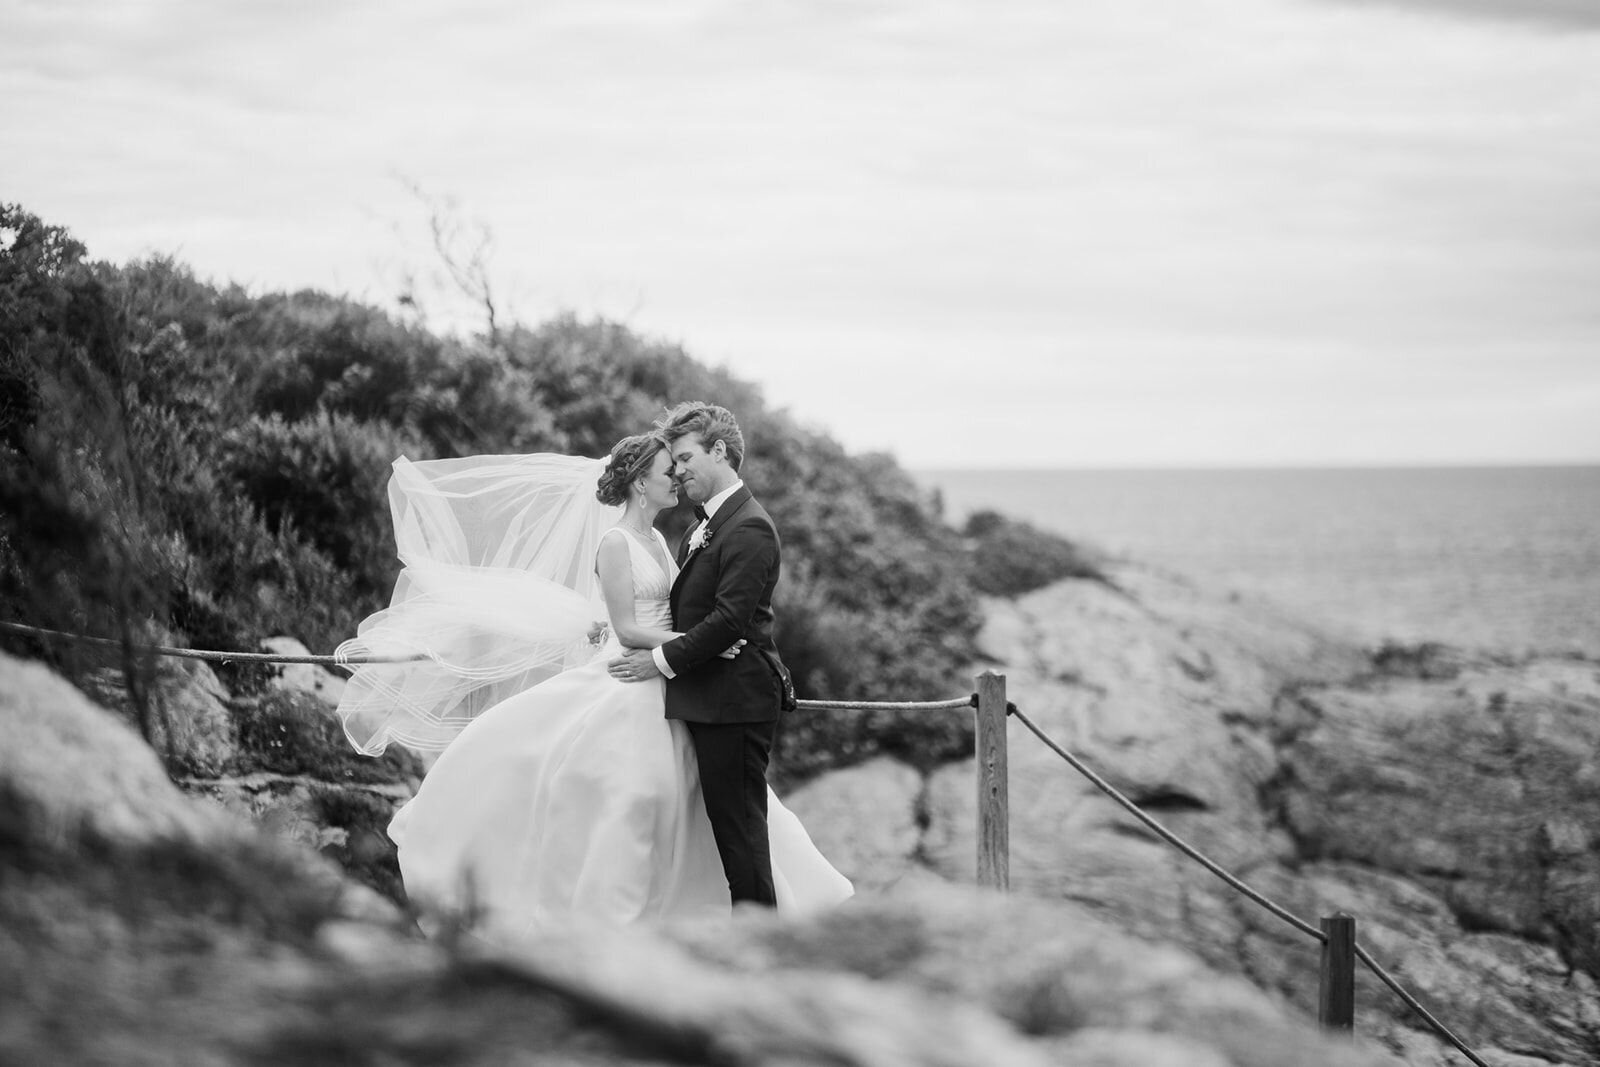 leila-james-events-newport-ri-wedding-planning-luxury-events-castle-hill-inn-chelsea-and-nick-wandering-woo-photography-35